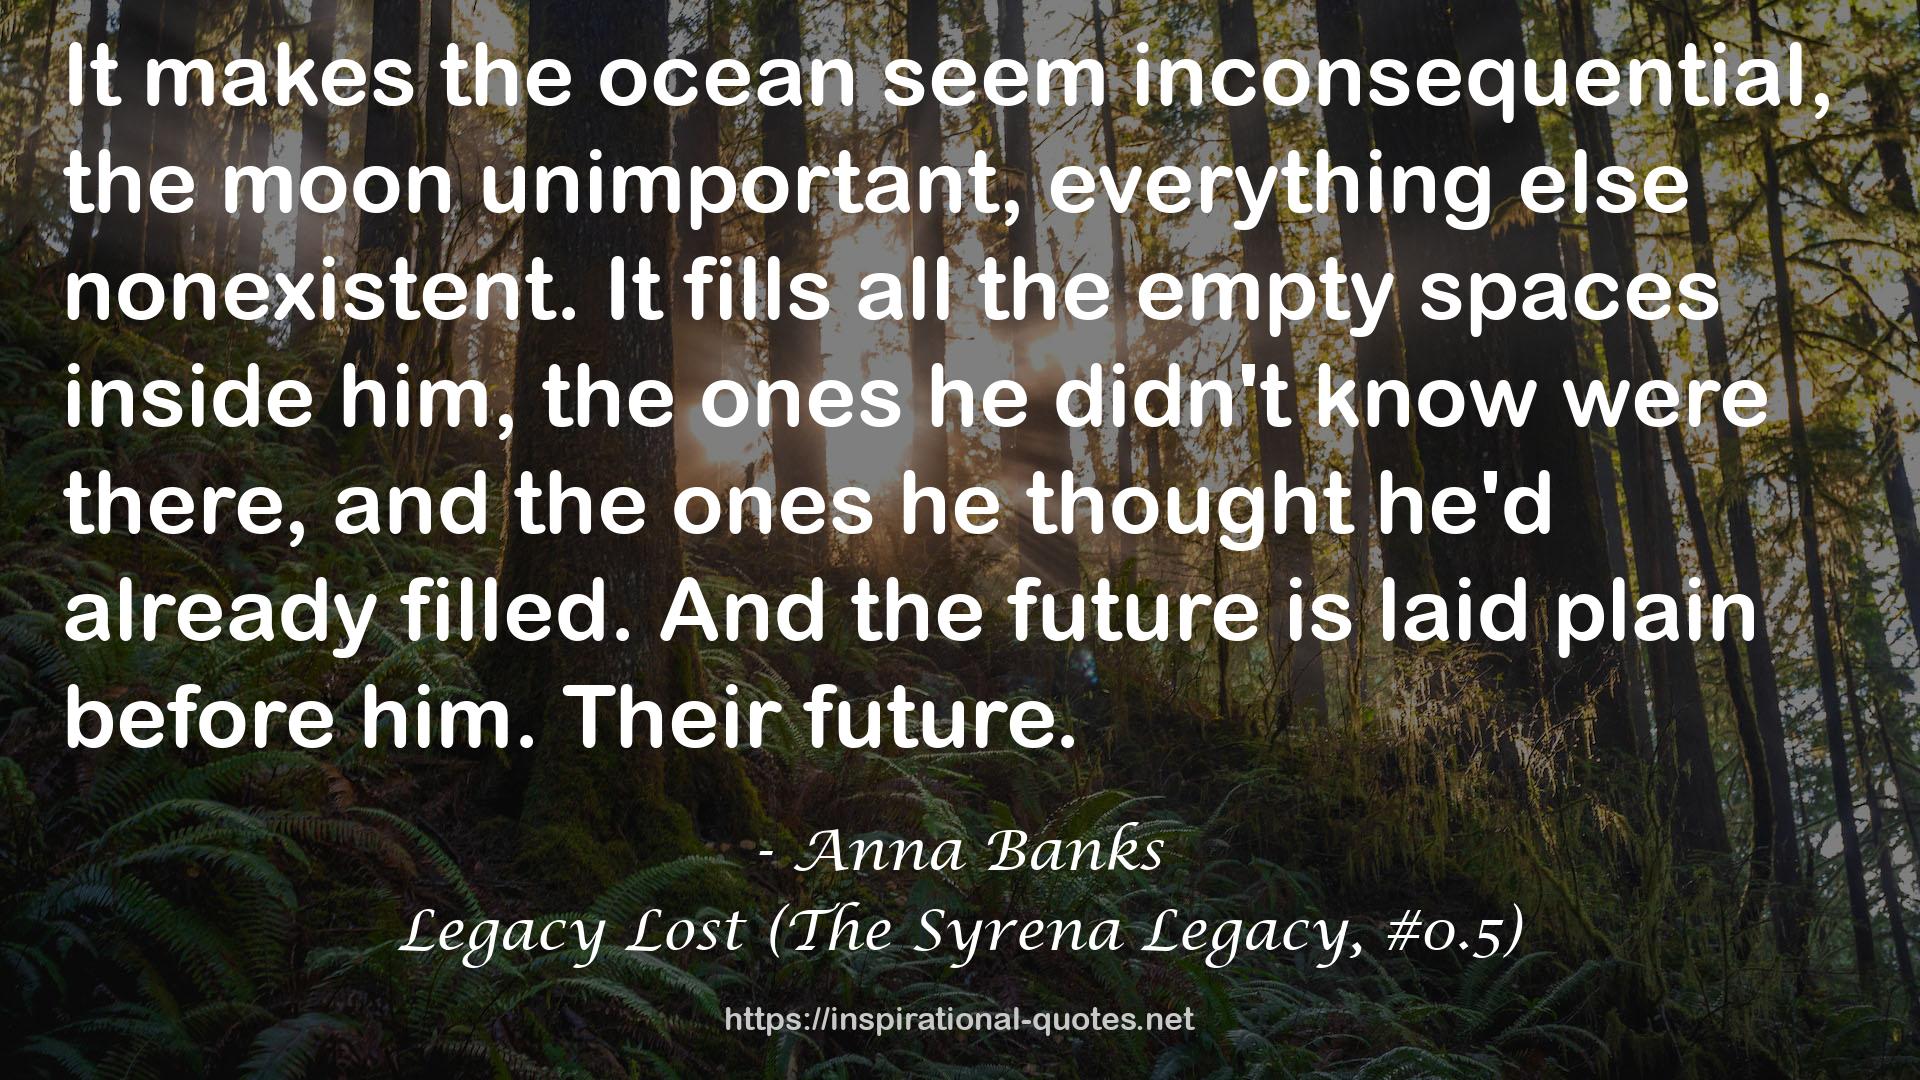 Legacy Lost (The Syrena Legacy, #0.5) QUOTES